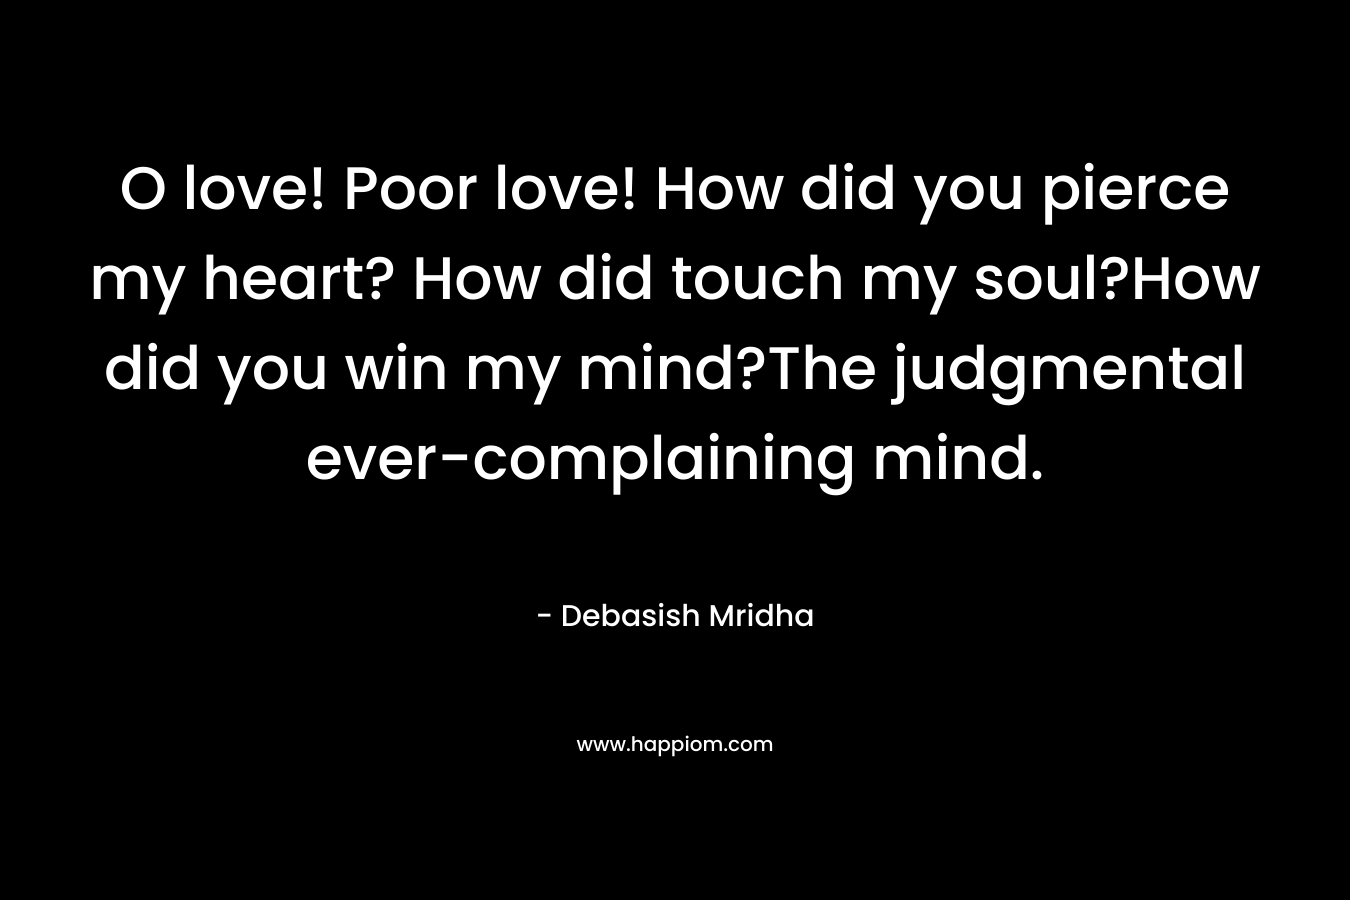 O love! Poor love! How did you pierce my heart? How did touch my soul?How did you win my mind?The judgmental ever-complaining mind. – Debasish Mridha